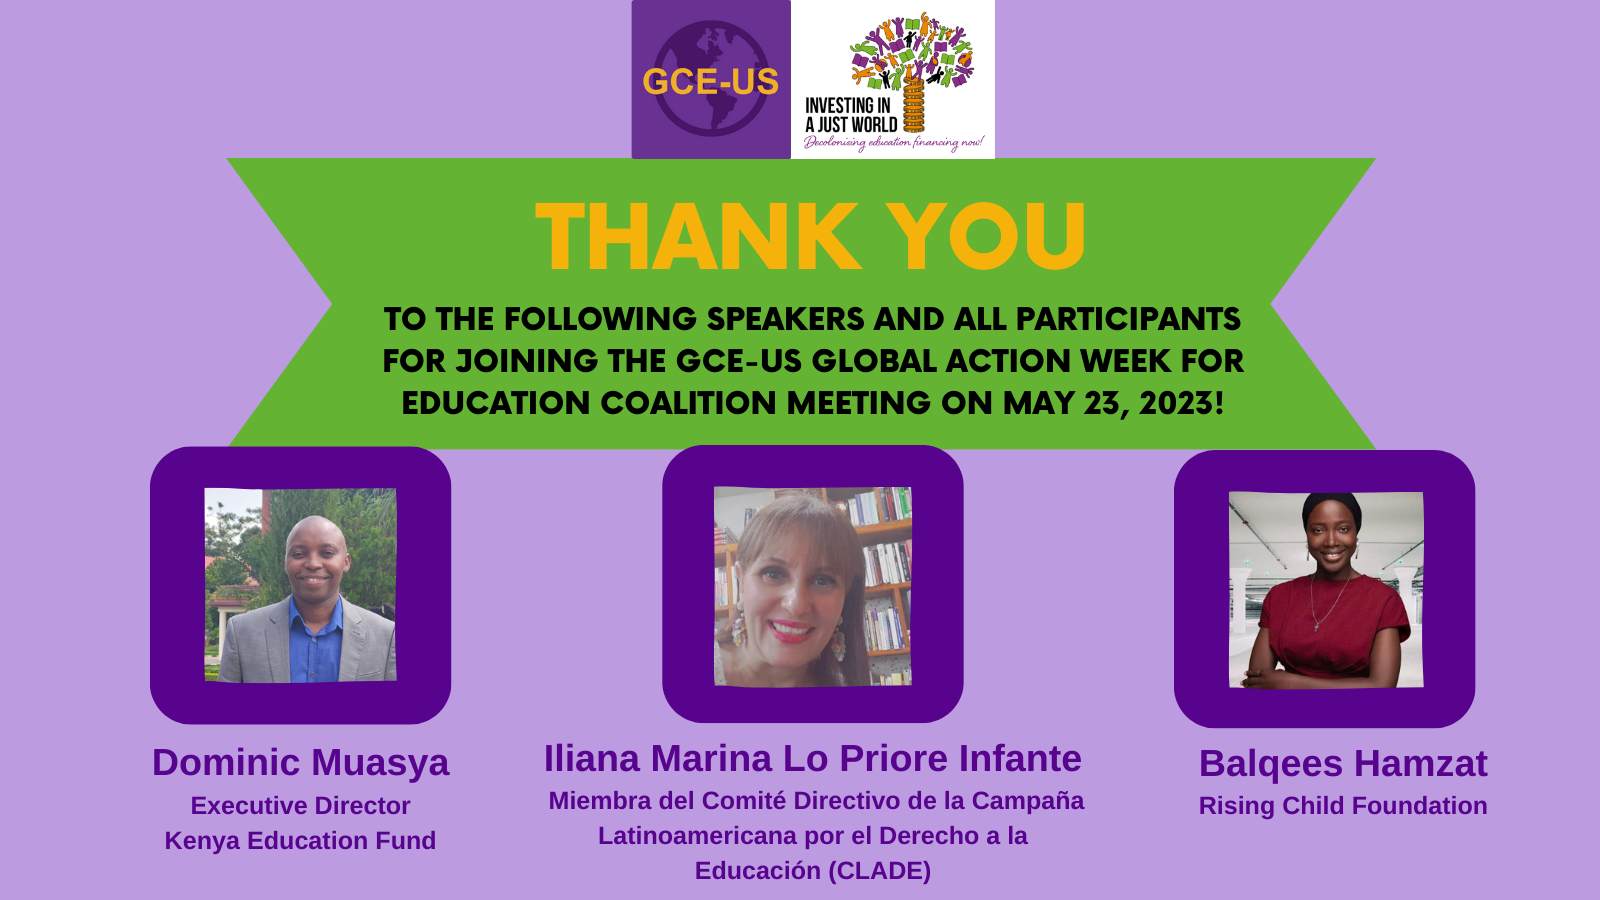 Purple background that includes photos of the three speakers and the following text: “Thank you to the following speaker and all participants for joining the GCE-US Global Action Week for Education Coalition Meeting on May 23, 2023! Dominic Muasya, Executive Director, Kenya Education Fund; Iliana Marina Lo Priore Infante, Miembra del Comité Directivo de la Campaña Latinoamericano por el Derecho a la Educación (CLADE), Balqees Hamzat, Rising Child Foundation.”